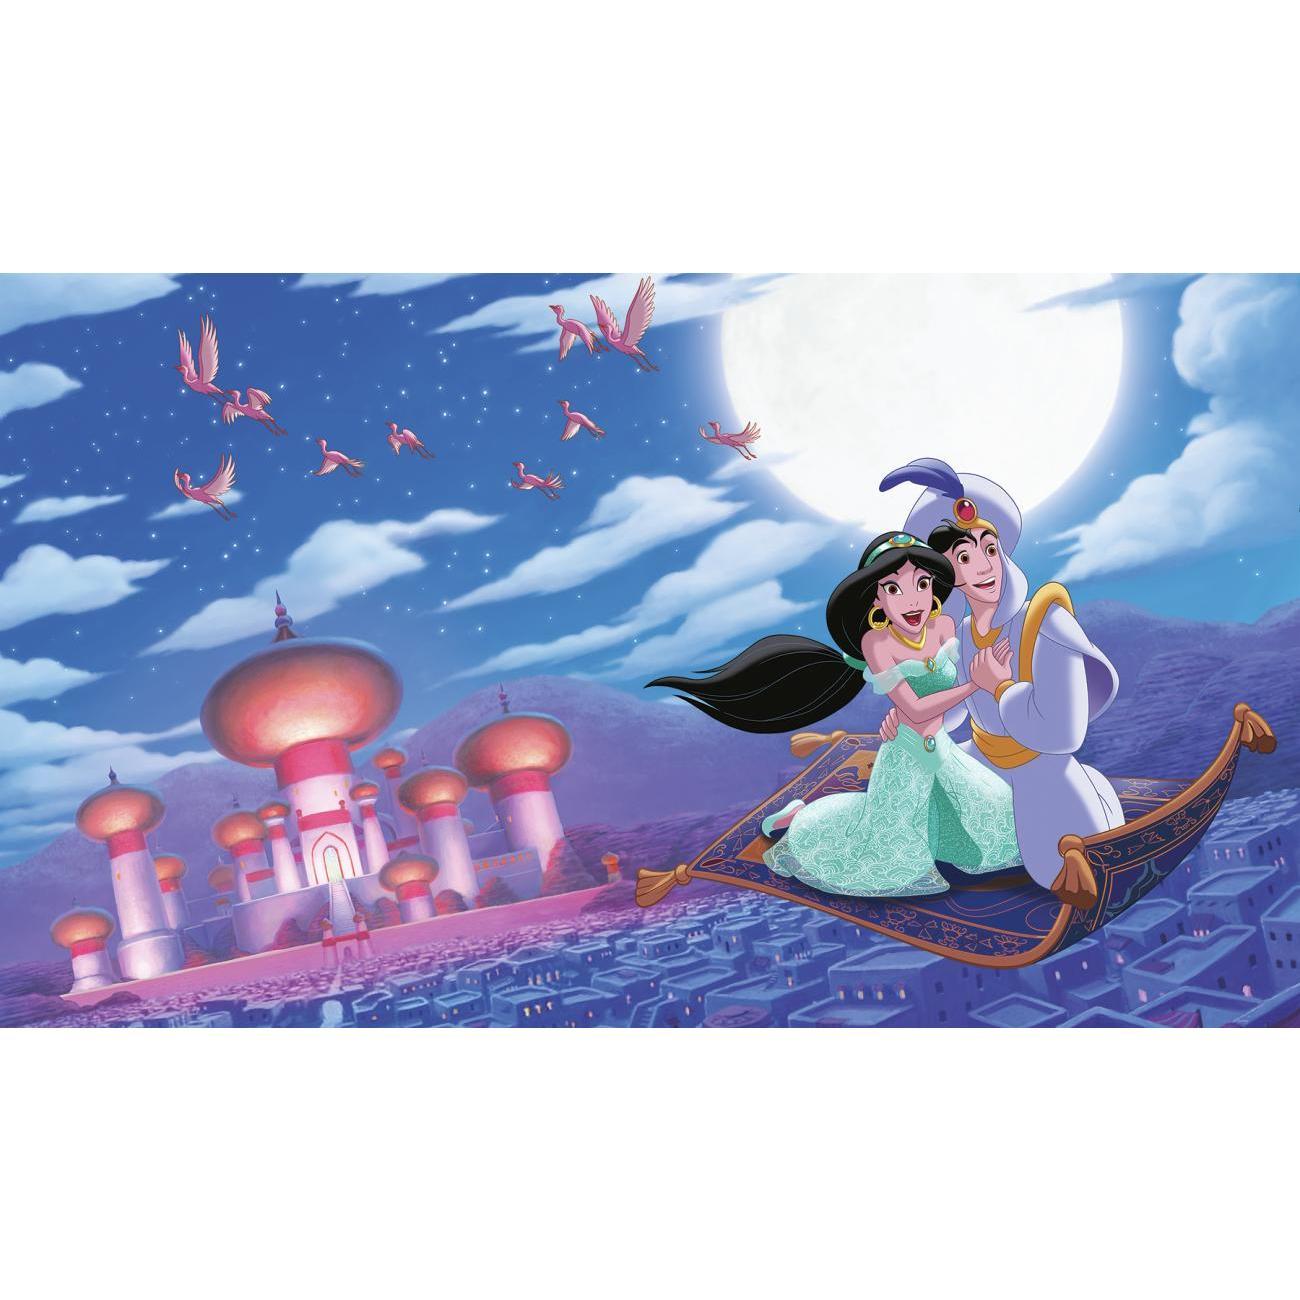 Aladdin "A Whole New World" XL Spray and Stick Wallpaper Mural Wall Murals RoomMates Mural  